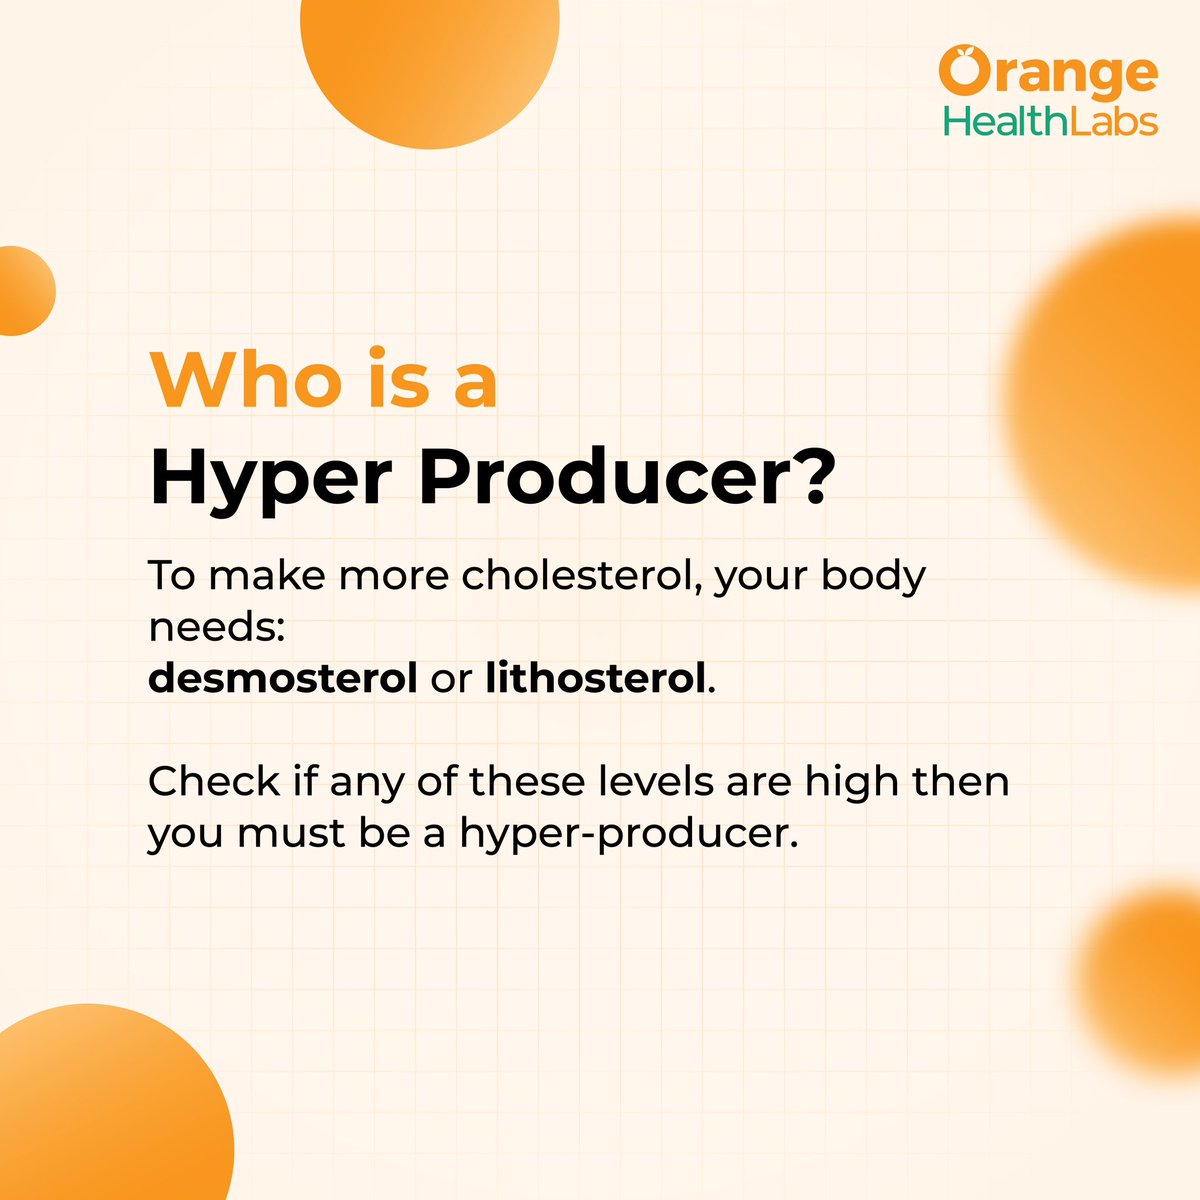 Cholesterol - broken down in easy steps for you to understand better. Know your body better and solve for it better. #orangehealthlabs #testathome #hearthealth #fastestdiagnosticlab